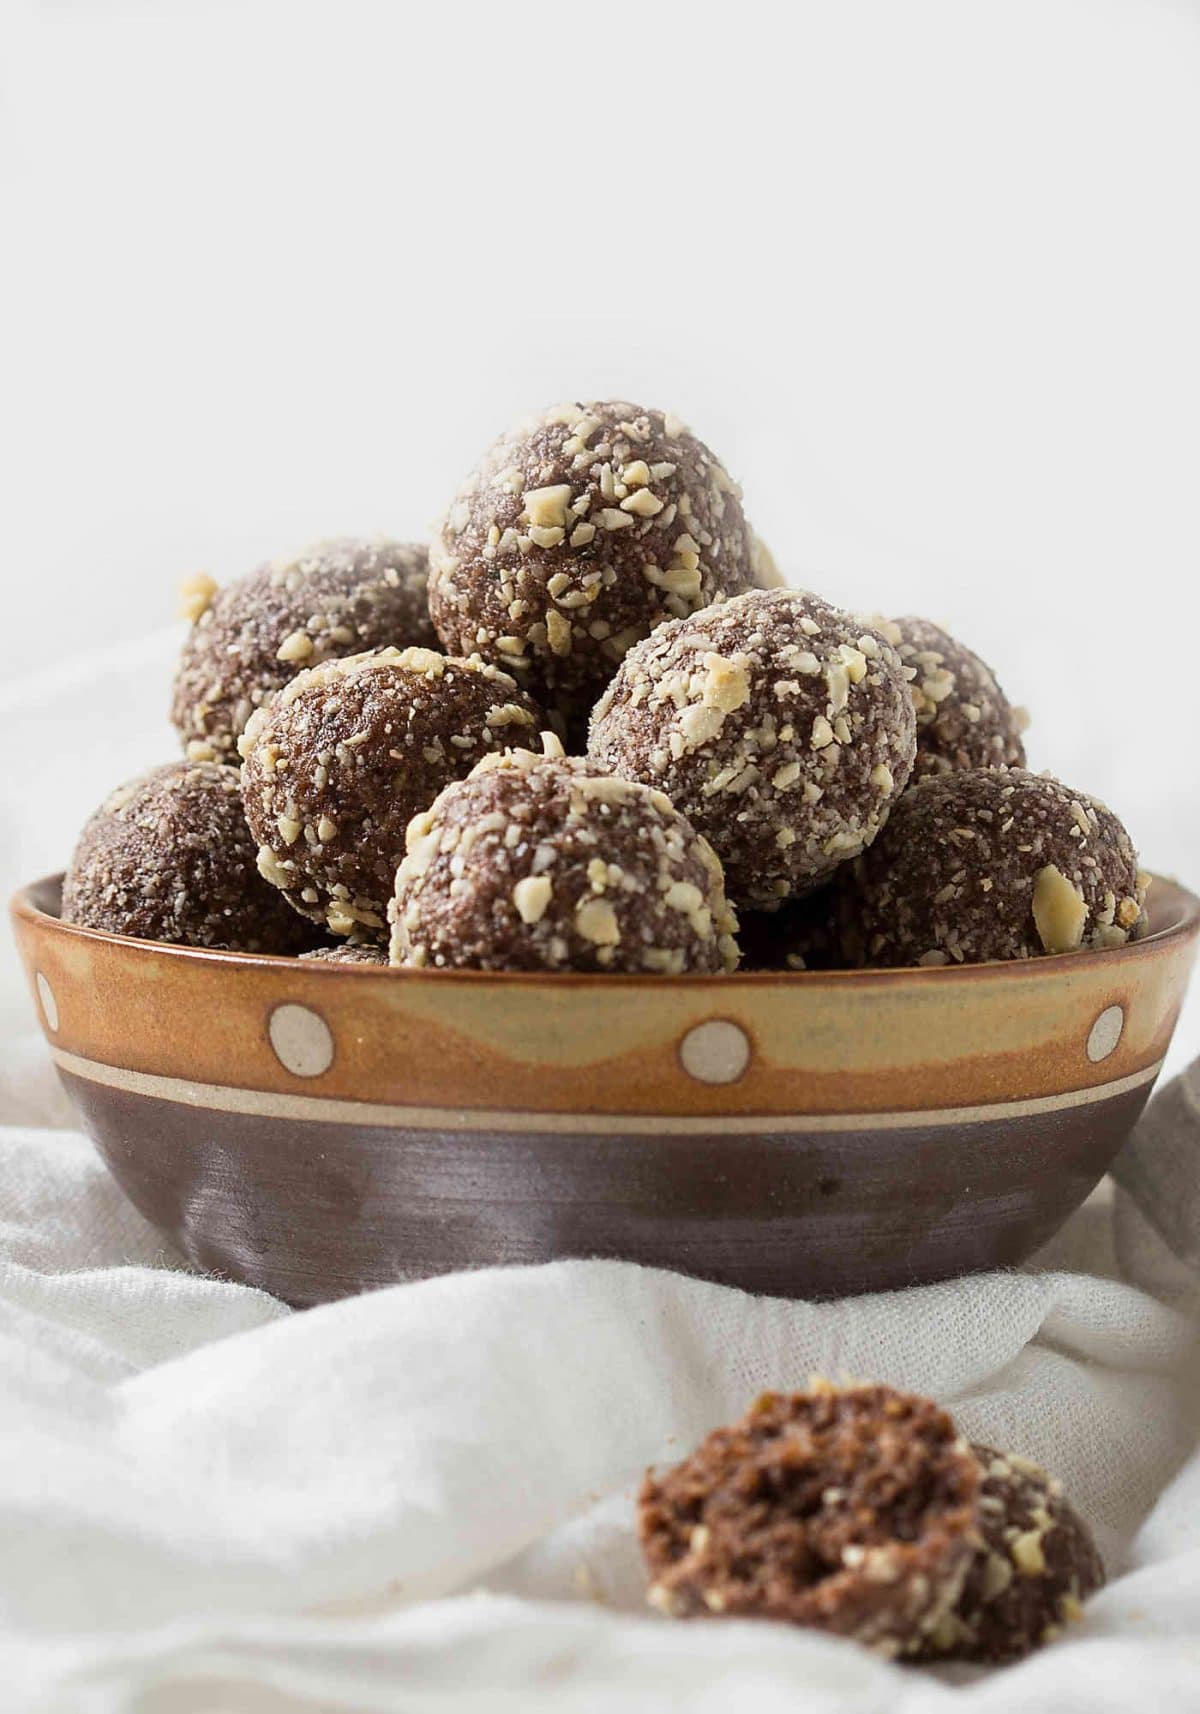 Coconut and almond butter based no bake energy balls. Nutritious and naturally sweetened.